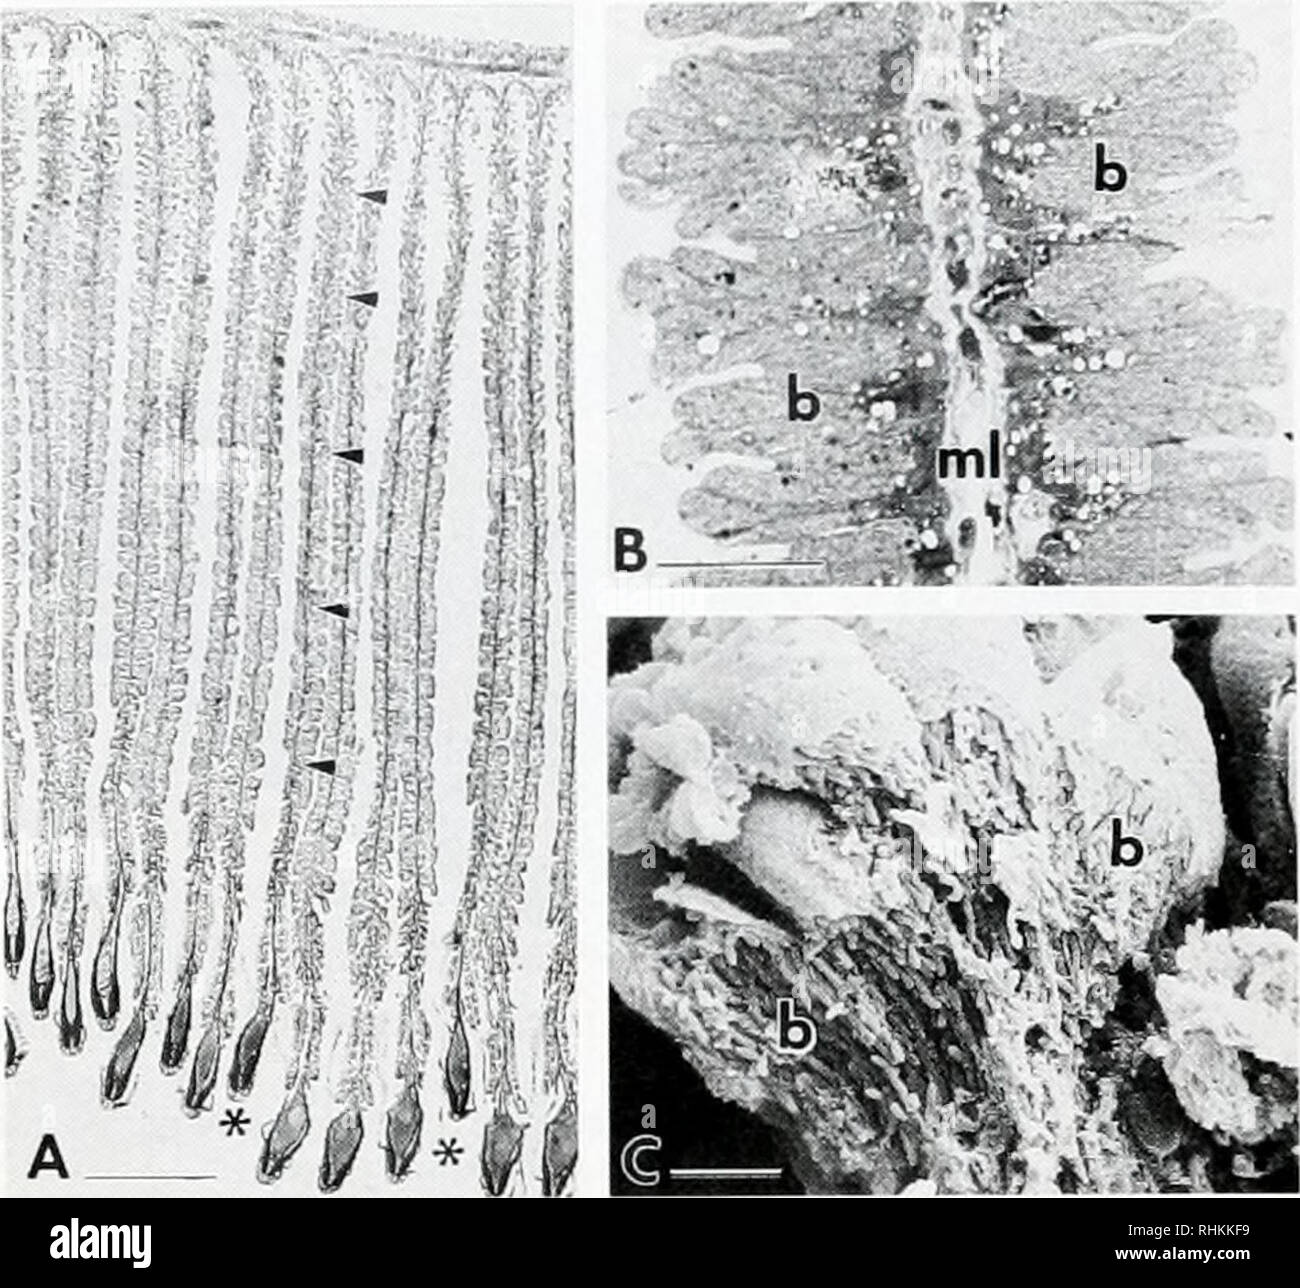 . The Biological bulletin. Biology; Zoology; Biology; Marine Biology. R. WINDOFFER AND O. GIERE wmmmi. Figure 3. (A) Cross section through several attached ctenidial fila- ments. Nearly the entire filament consists of bacteriocytes (arrowheads). The ventral edge (*) contains a wide hemocoelic vessel; the dorsal edge is attached to the mantle (azan-stained paraffin section, light micro- graph). Scale 1 mm. (B) Details of filament, median cross section, show- ing the two layers of bacteriocytes (b) separated by the middle lamella (ml). Scale 100 fjm. (C) Scanning electron micrograph of bacterioc Stock Photo